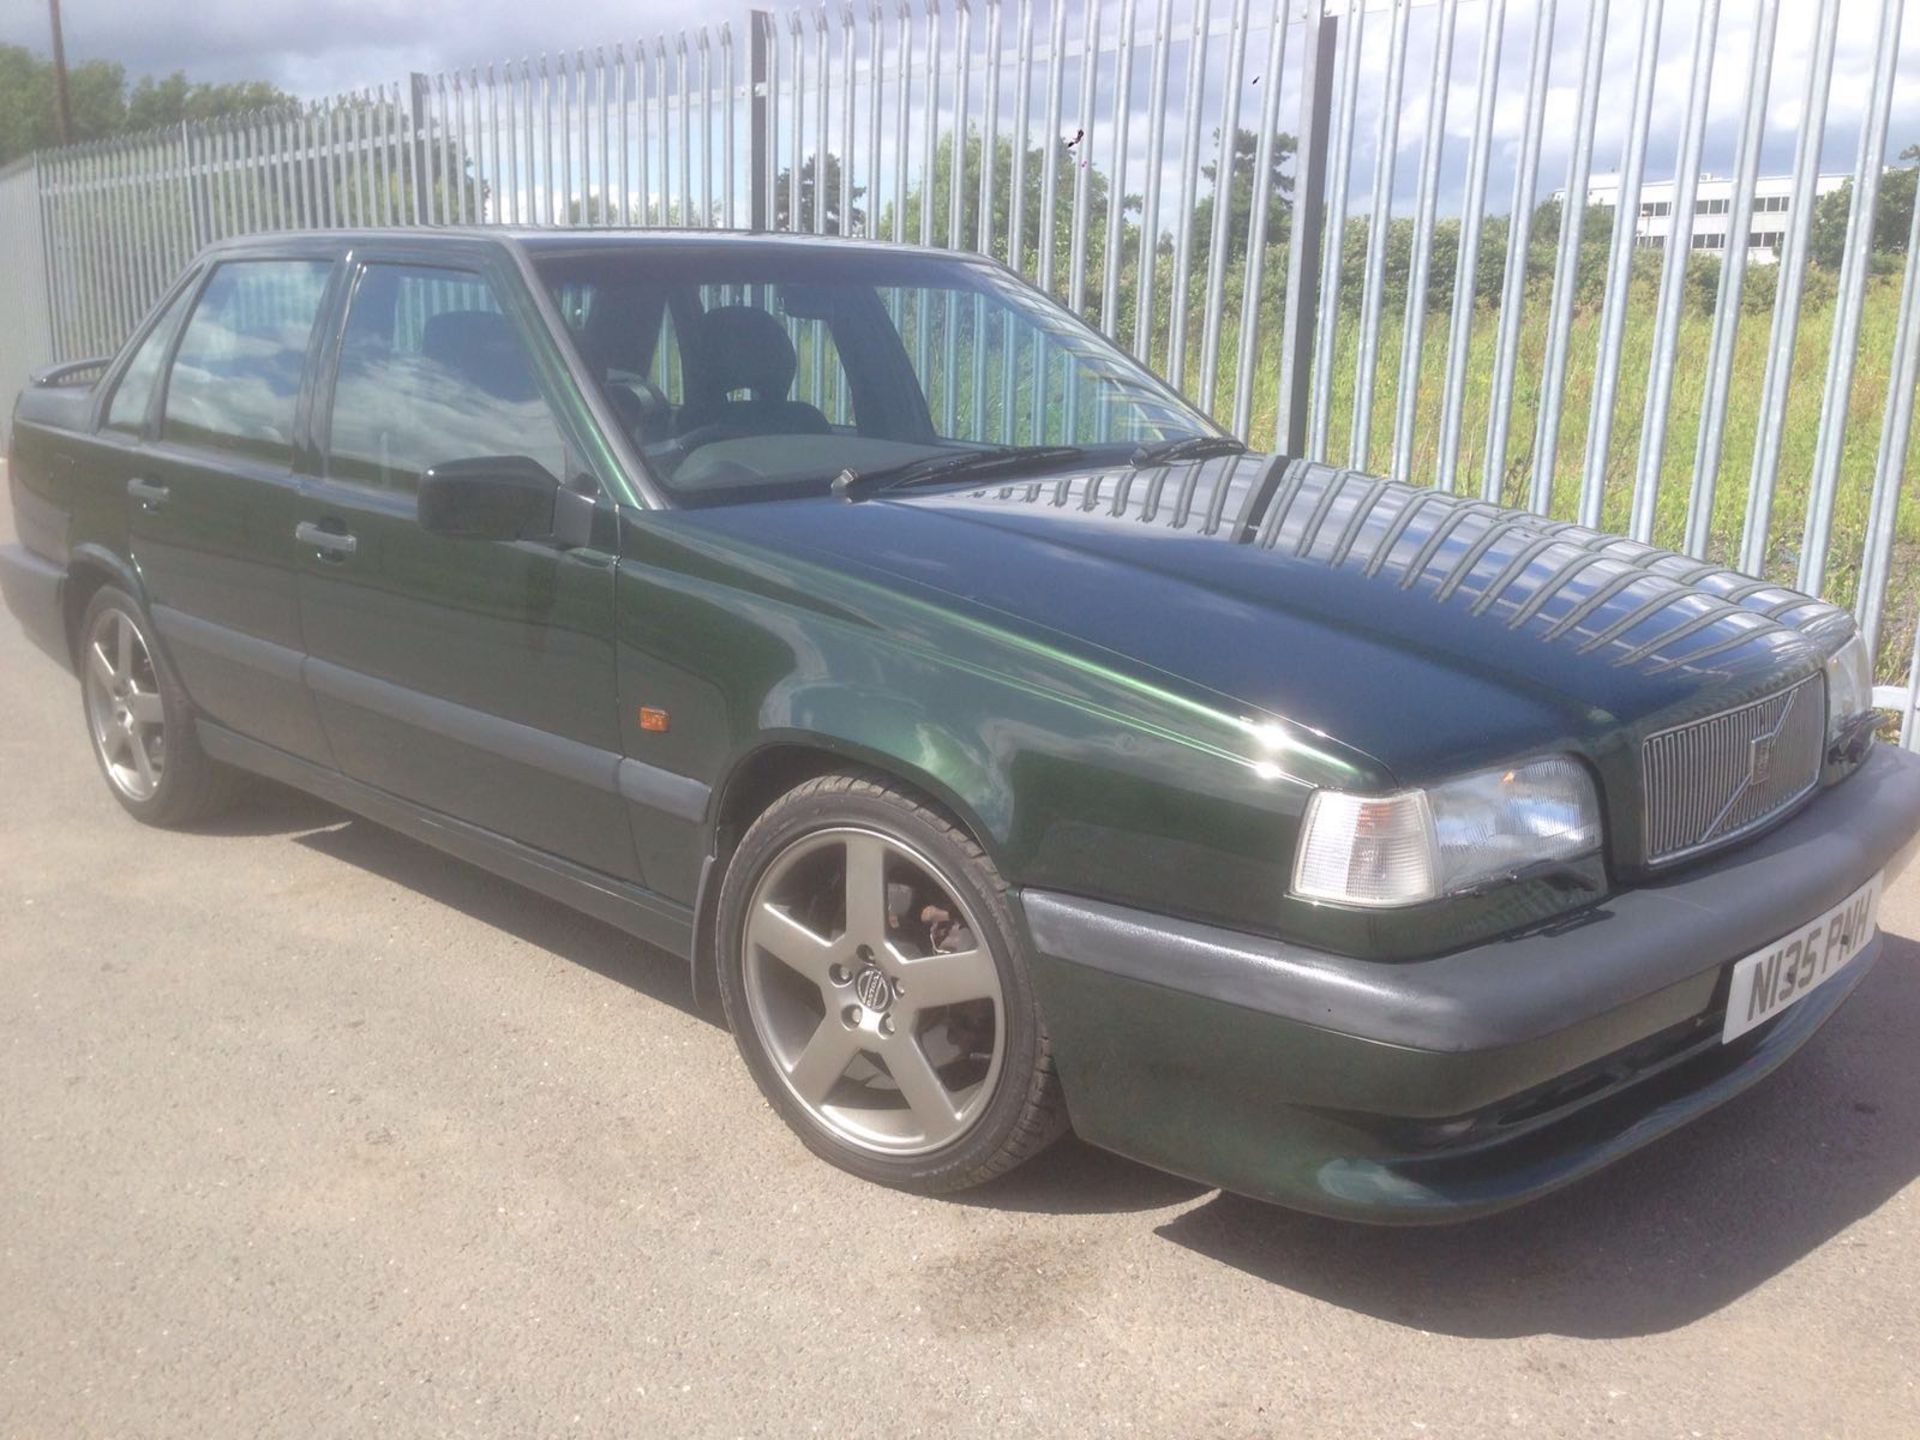 VOLVO T5-R saloon auto, 1995/N. olive green,